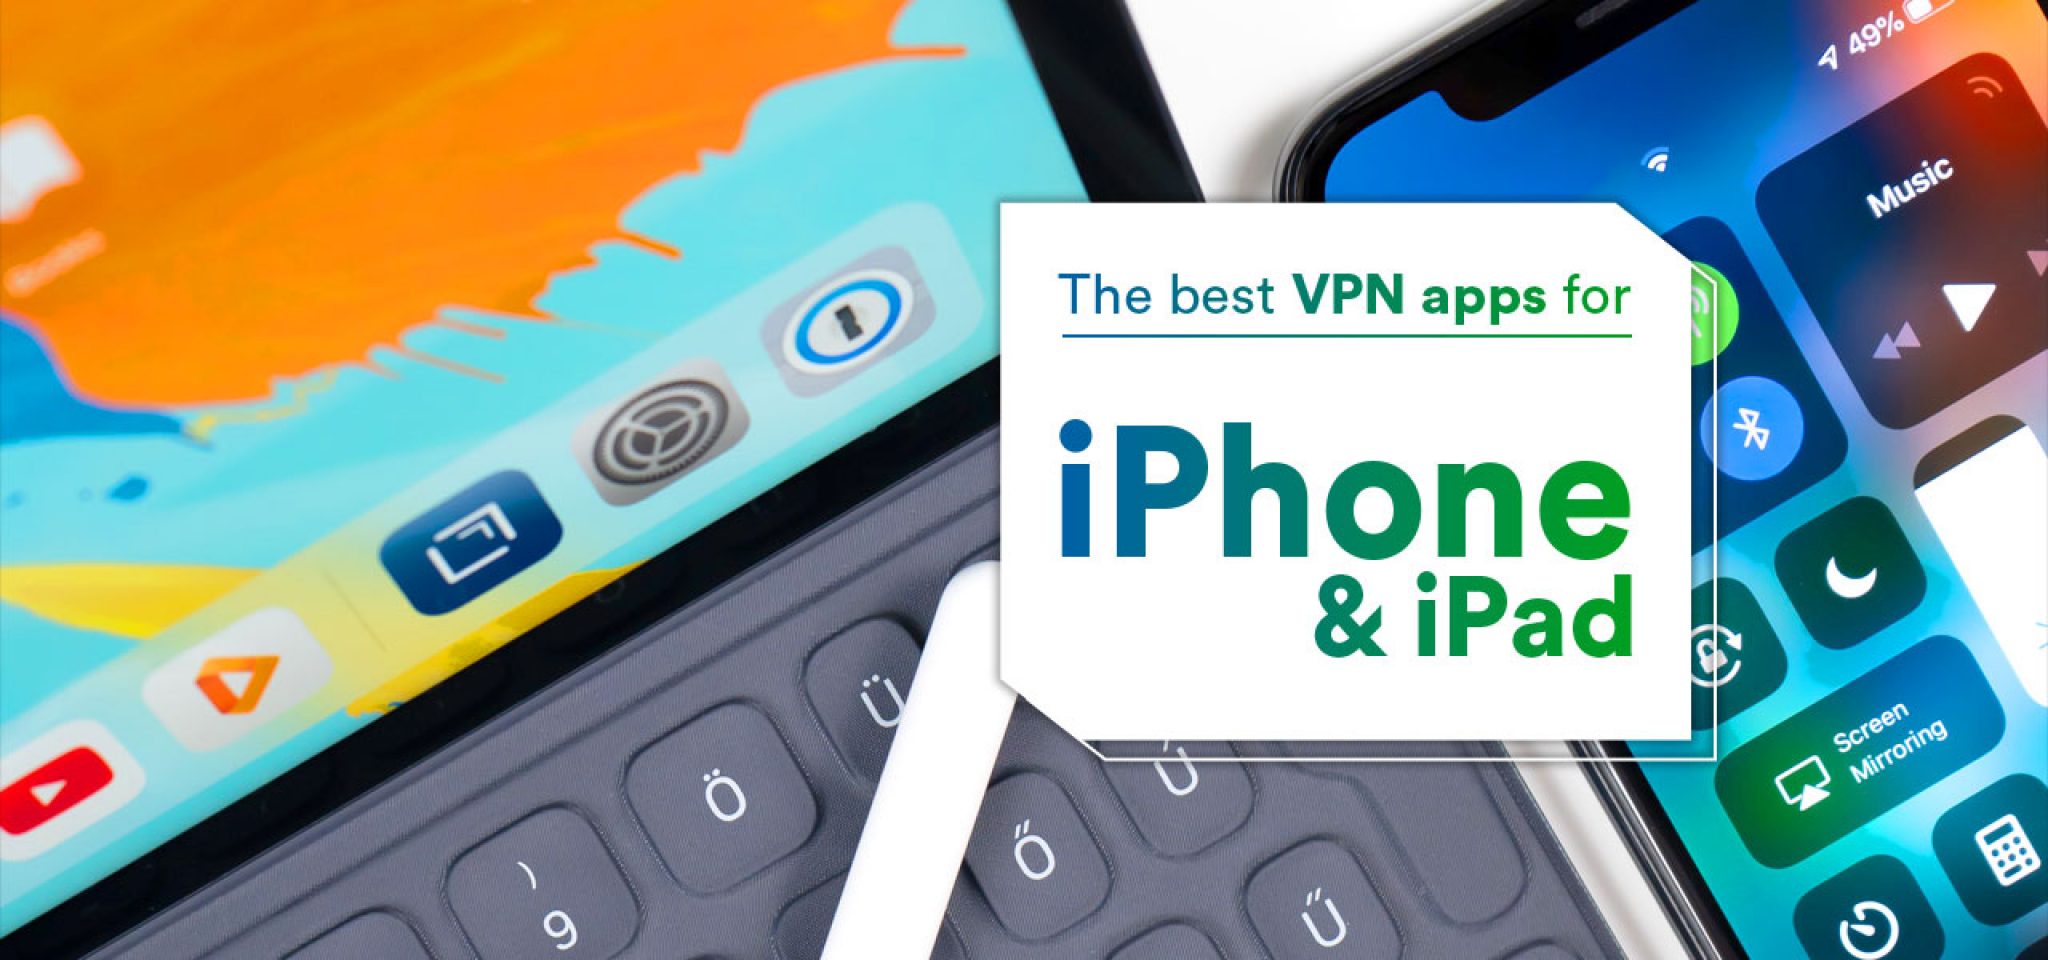 The Best VPN Apps for iPhone and iPad | VPNveteran.com